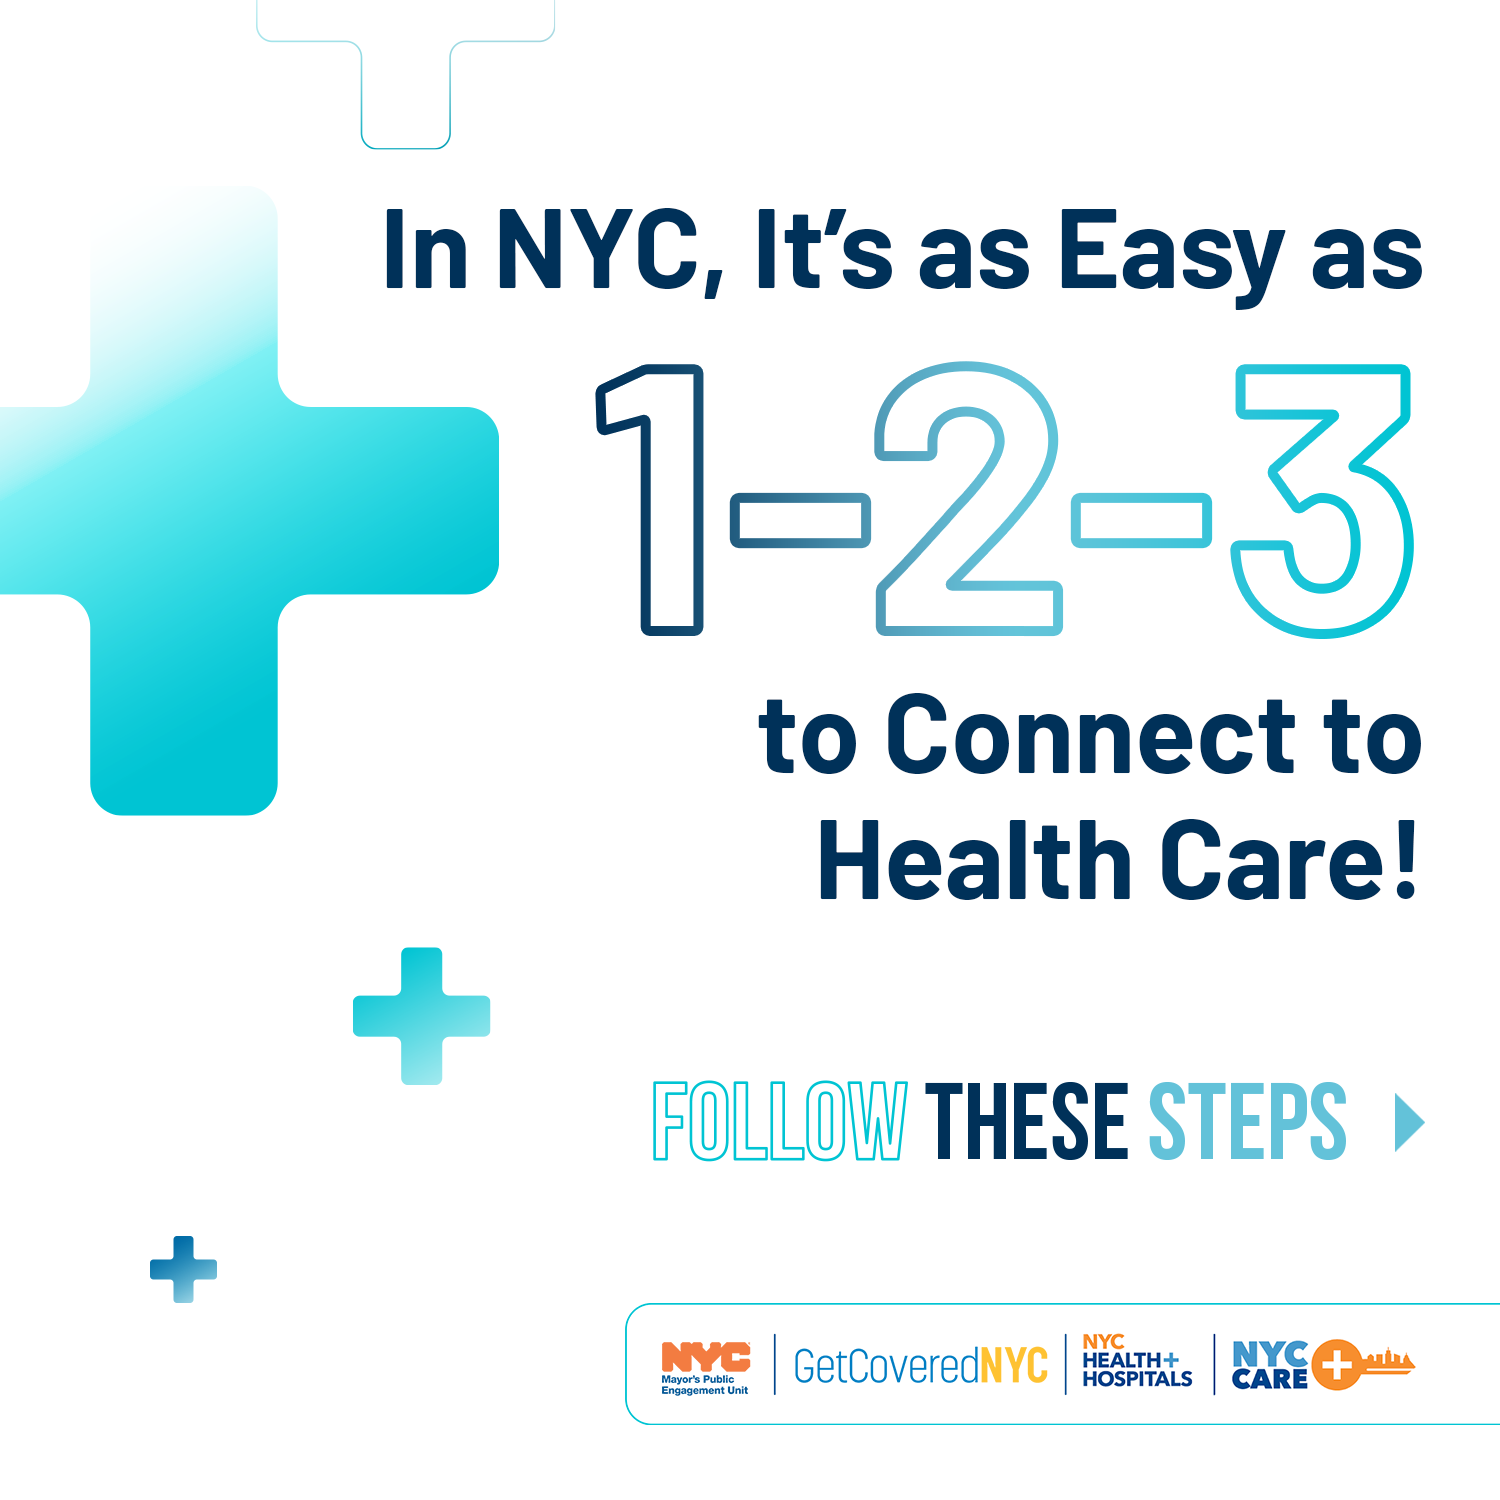 In NYC It's as Easy as 1-2-3 to Connect to Health Care. Follow these steps.